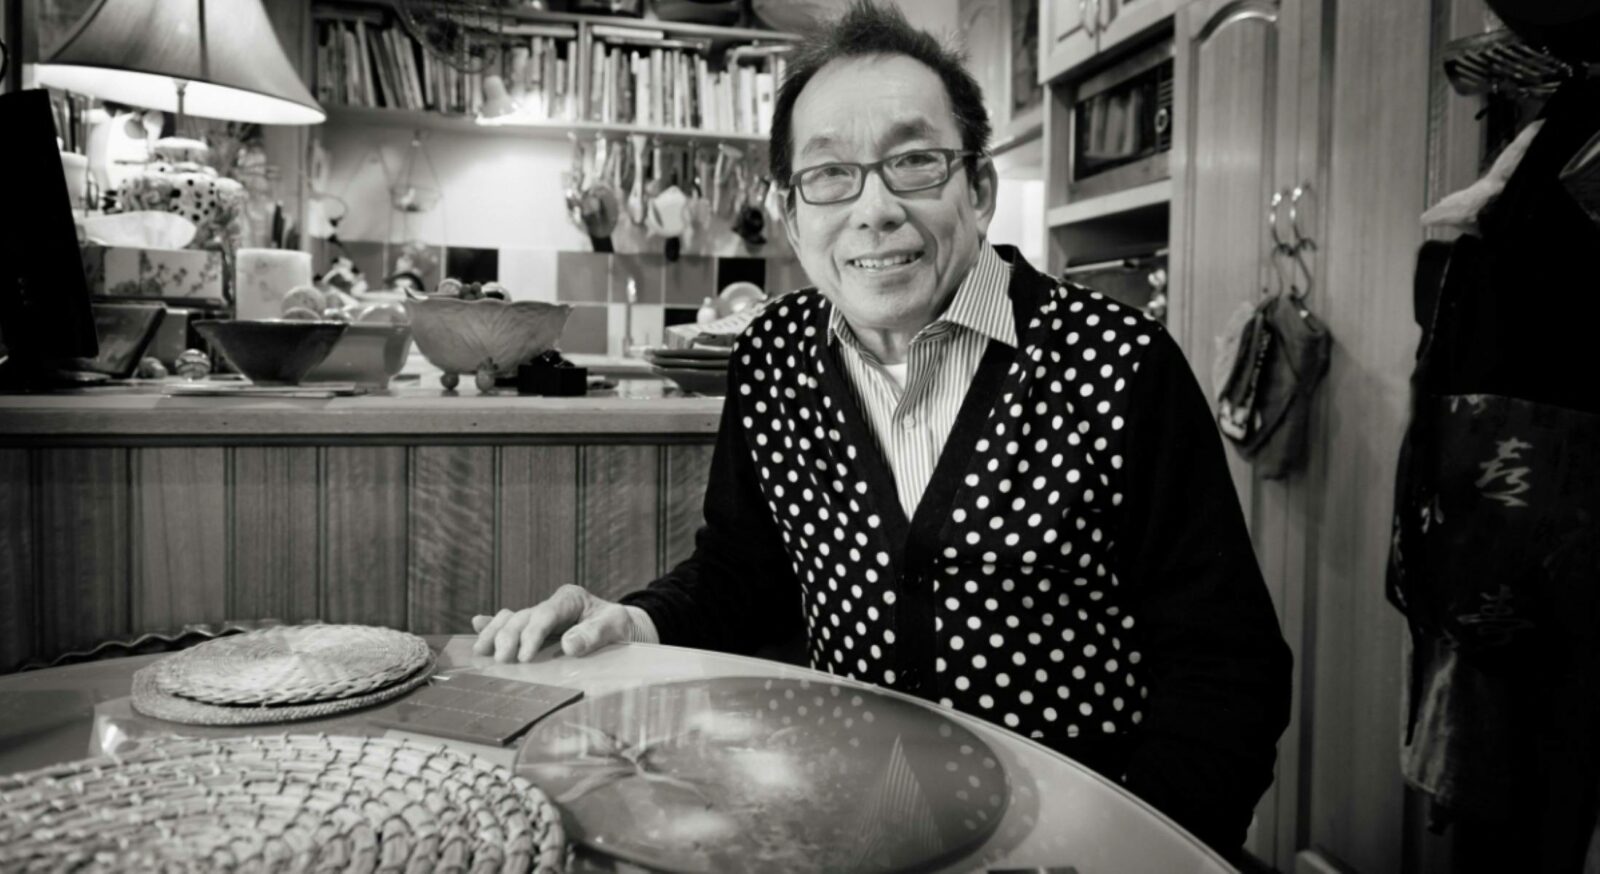 Black and white portrait image of Launceston local Greg Leong in his home.